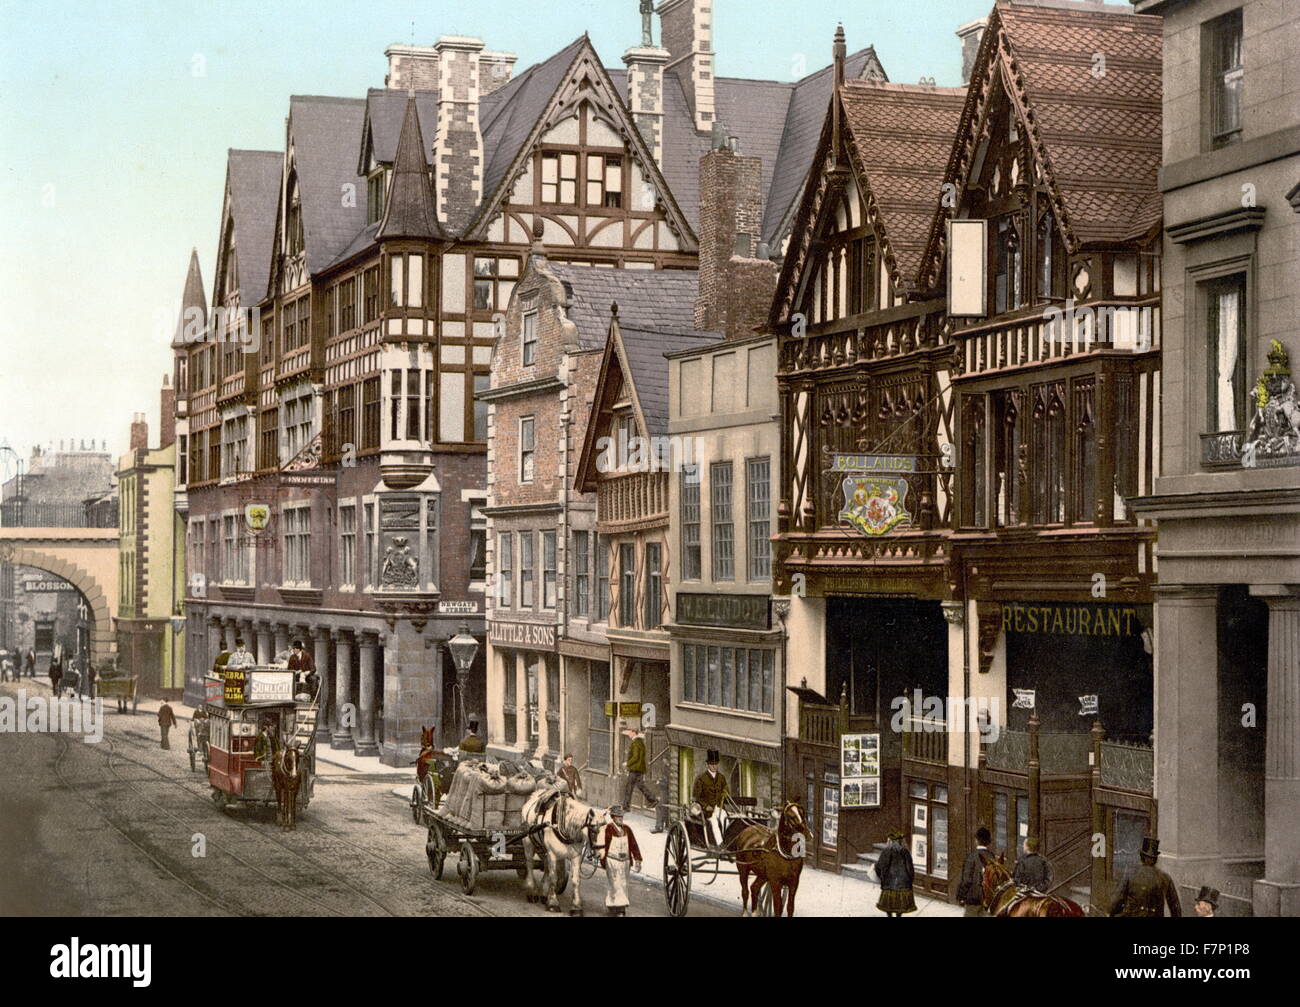 Street scene with horse drawn vehicles, Eastgate Street and Newgate Street, Chester, England 1890 Stock Photo